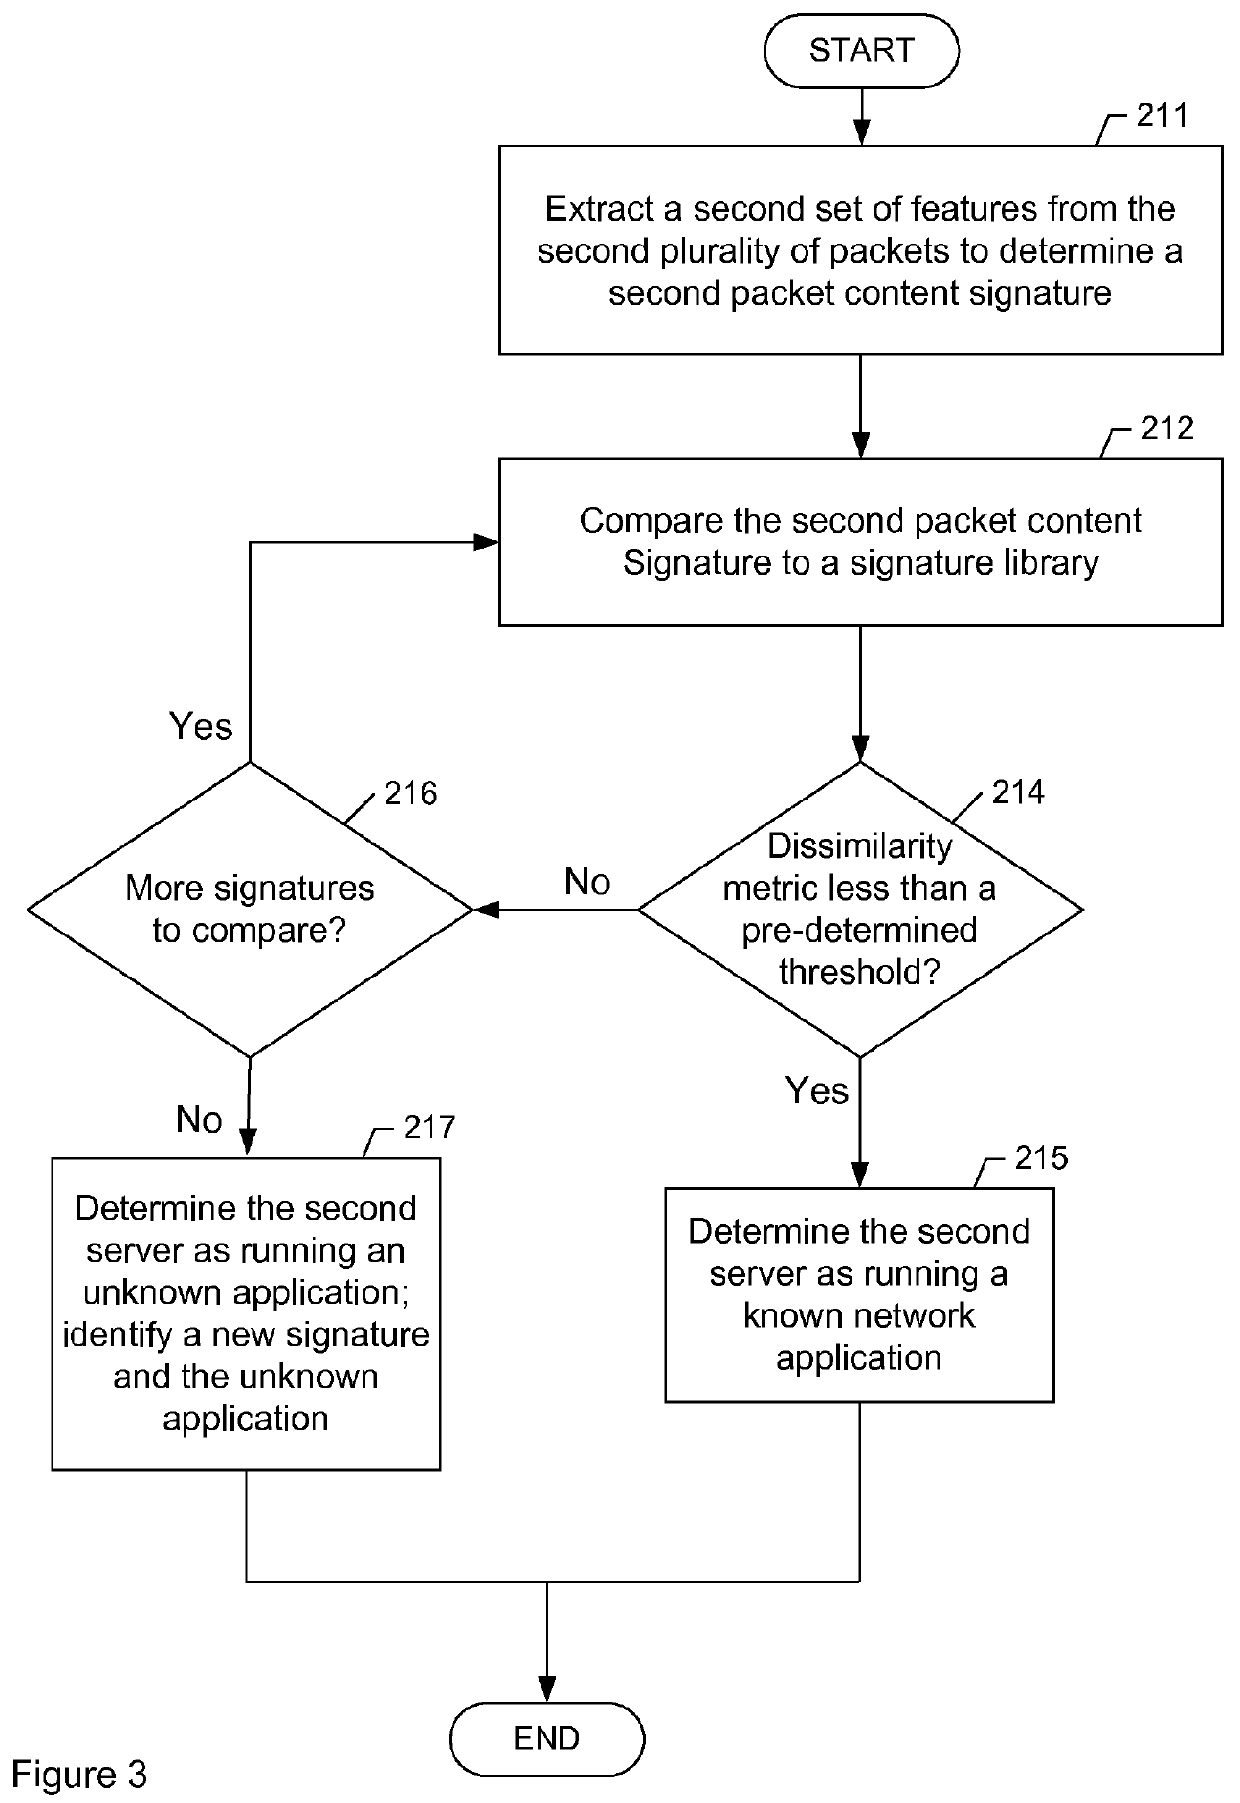 System and method for identifying network applications based on packet content signatures